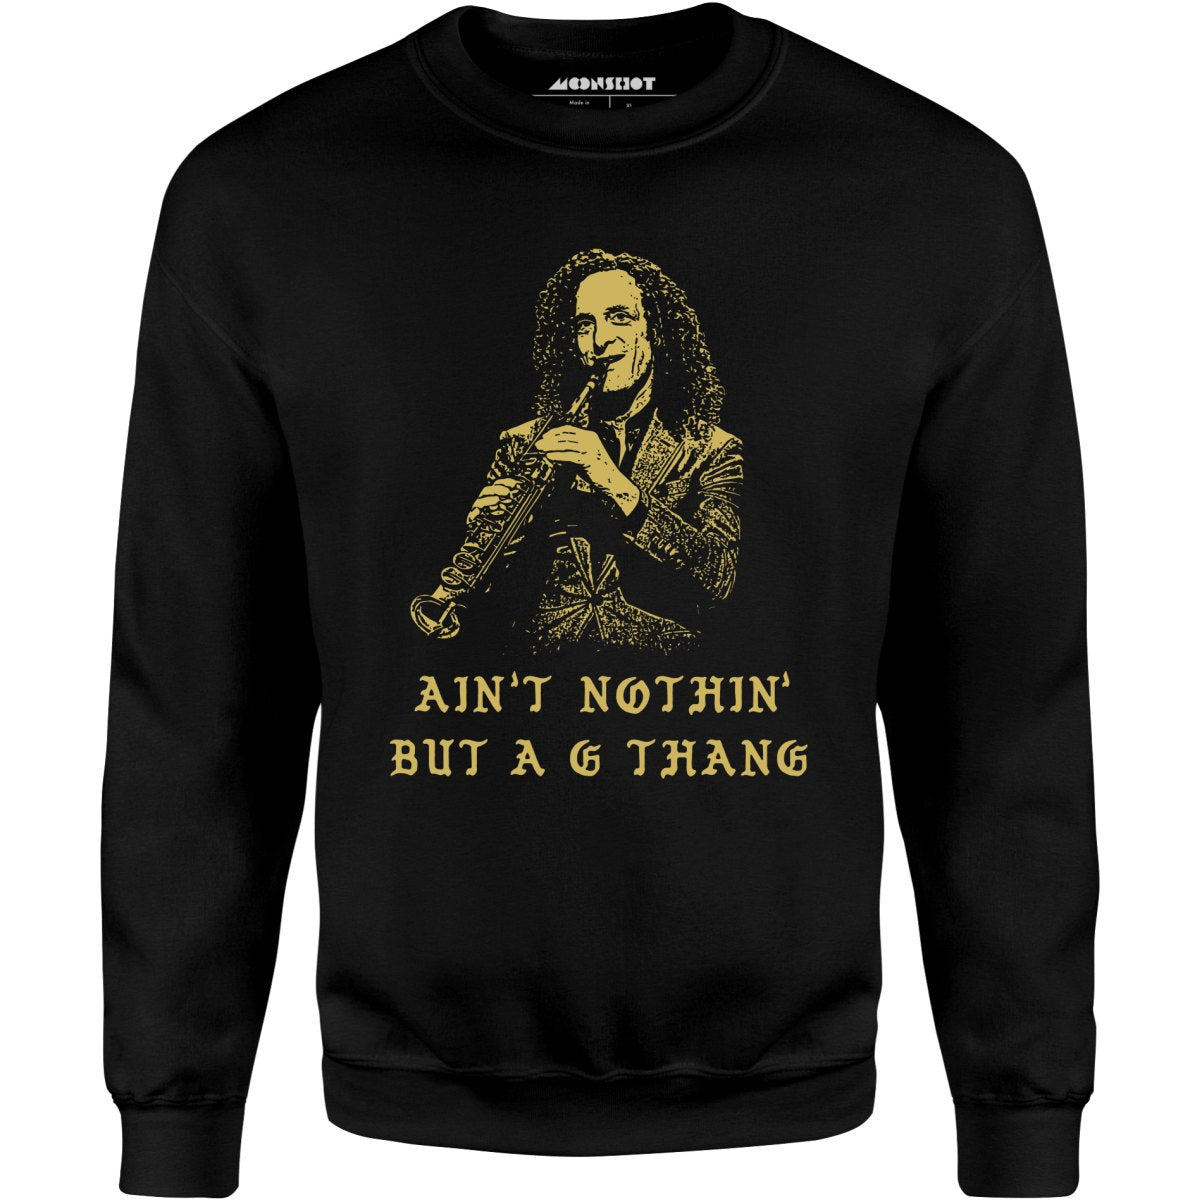 Ain't Nothin' But a G Thang - Unisex Sweatshirt